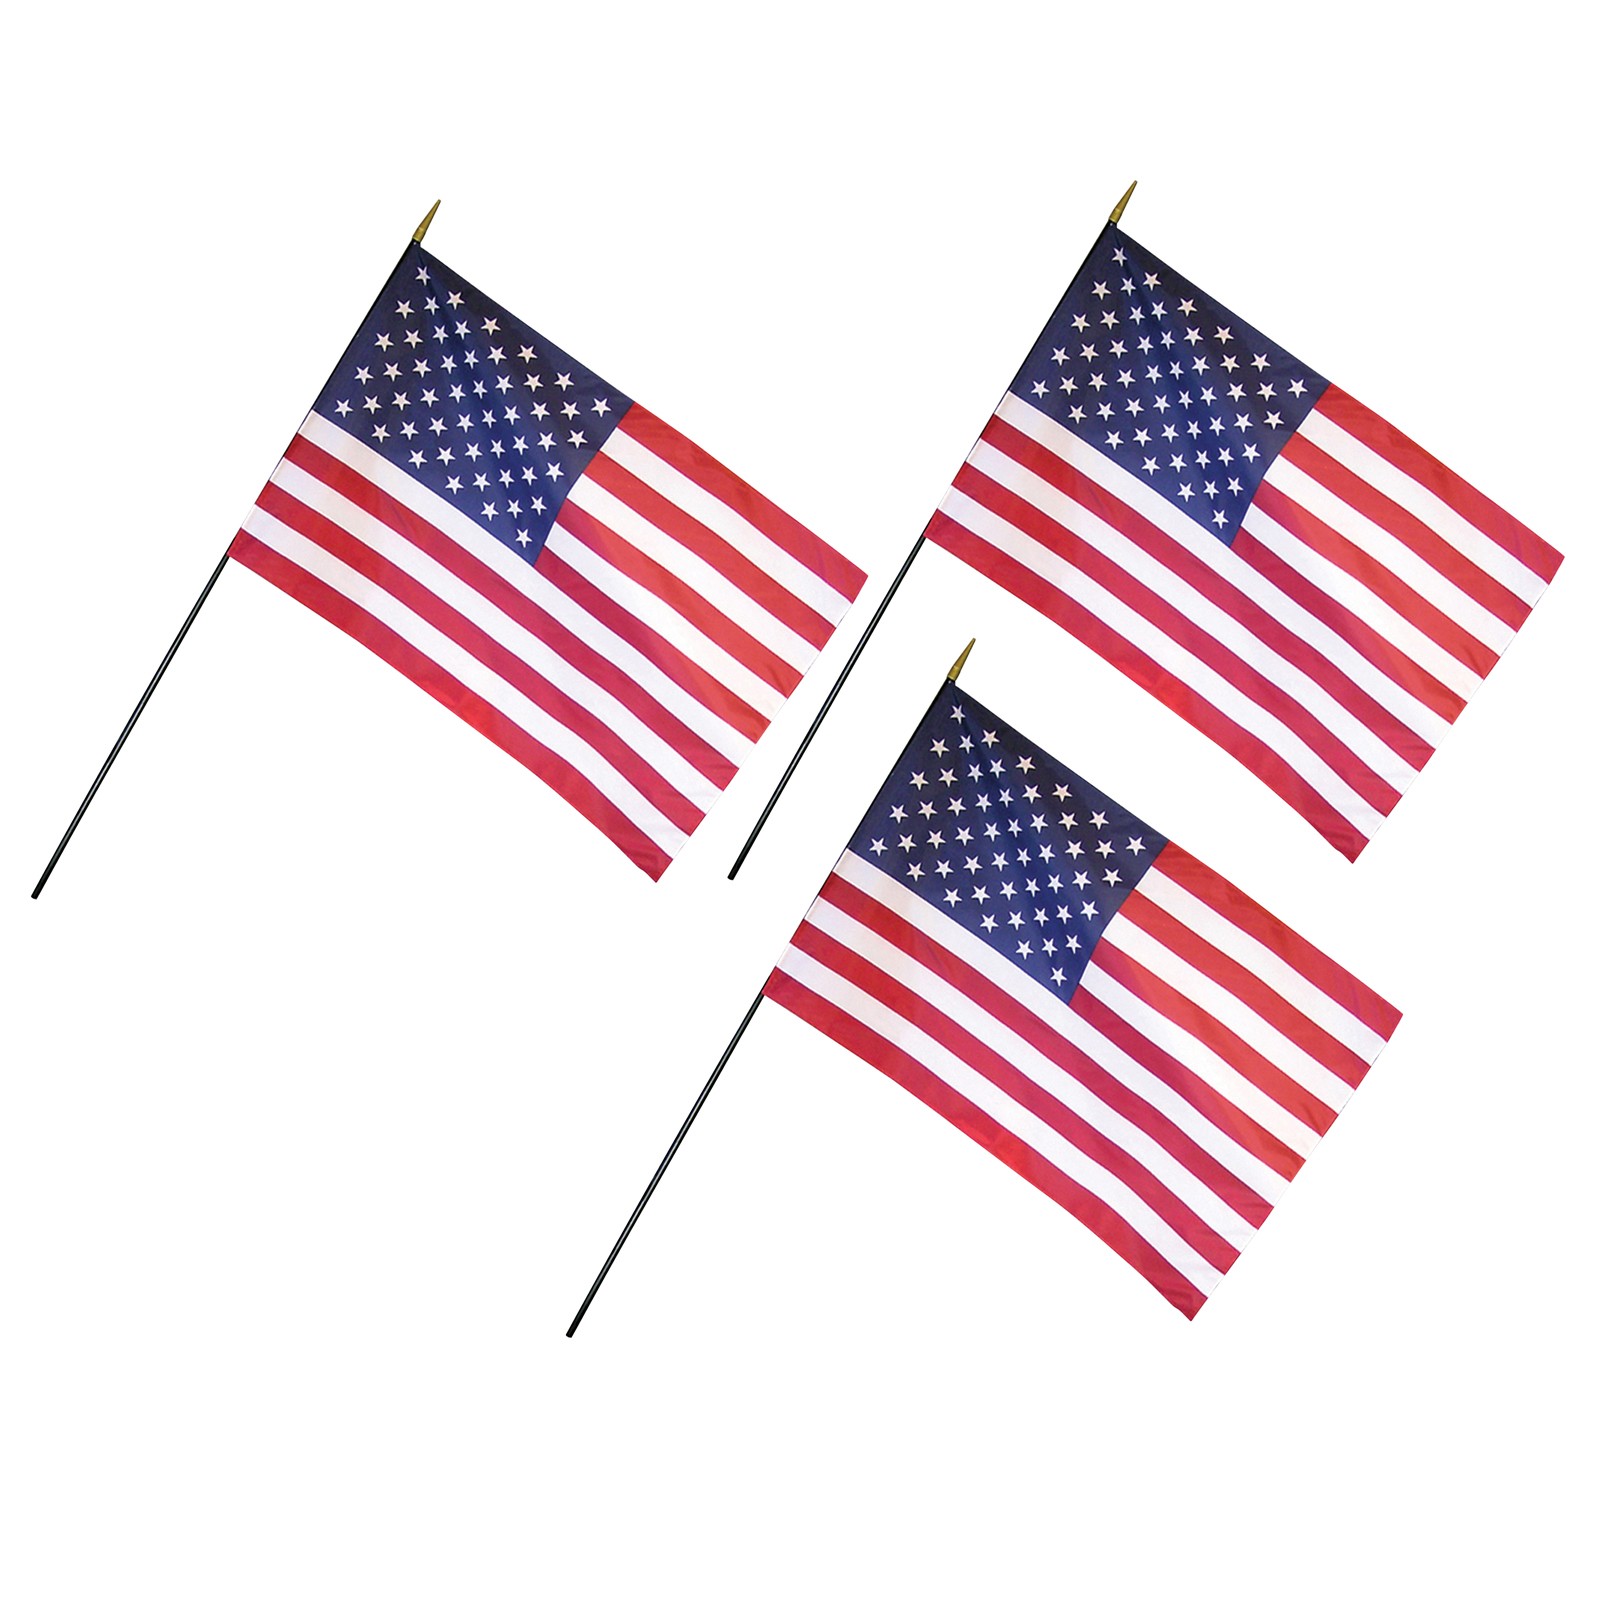 U.S. Classroom Flag with Staff, 12" x 18", Pack of 3